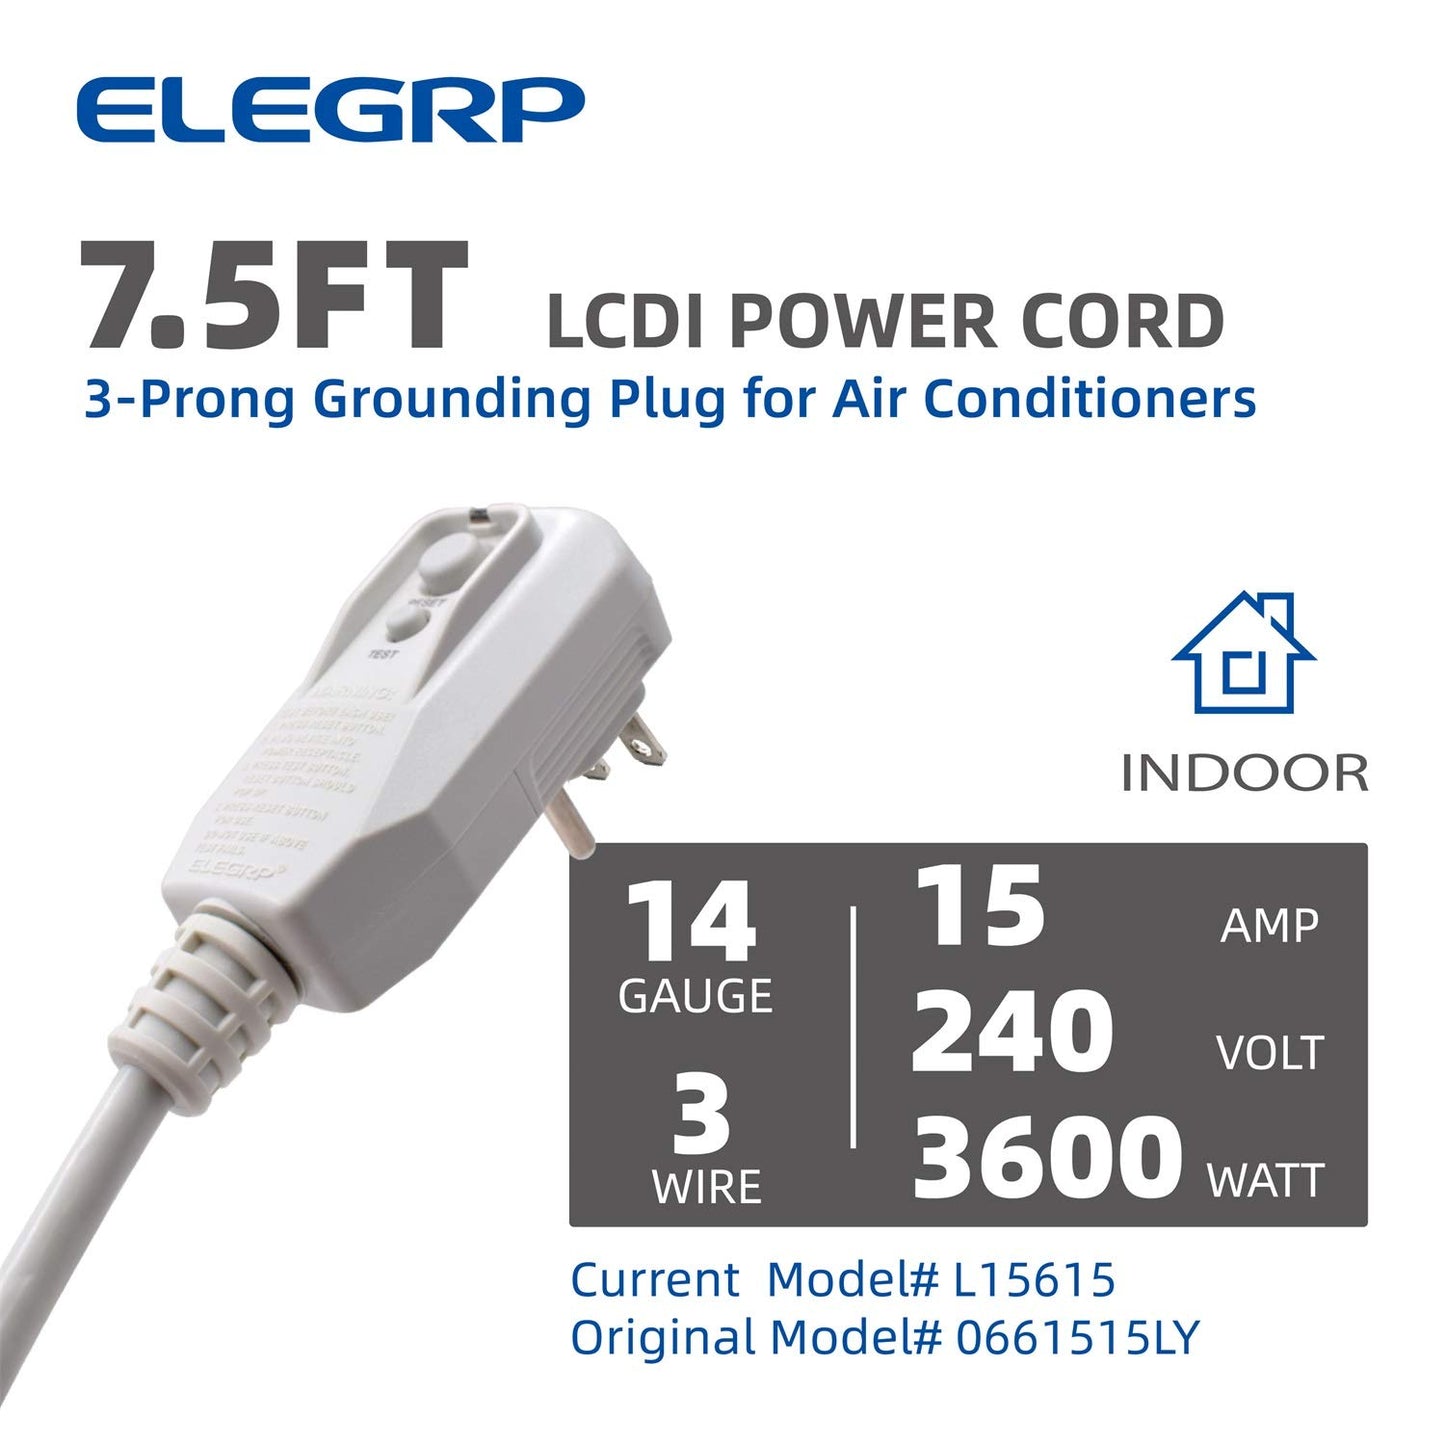 ELEGRP 240VAC 15Amp 3600W 14AWG LCDI Power Cord Plug 60Hz NEMA 6-15P for A/C Air Conditioner, E250451 UL Certified, 7.5FT Leakage Current Detection Interrupter Replacement 0661515LY L15615 (1 Pack)